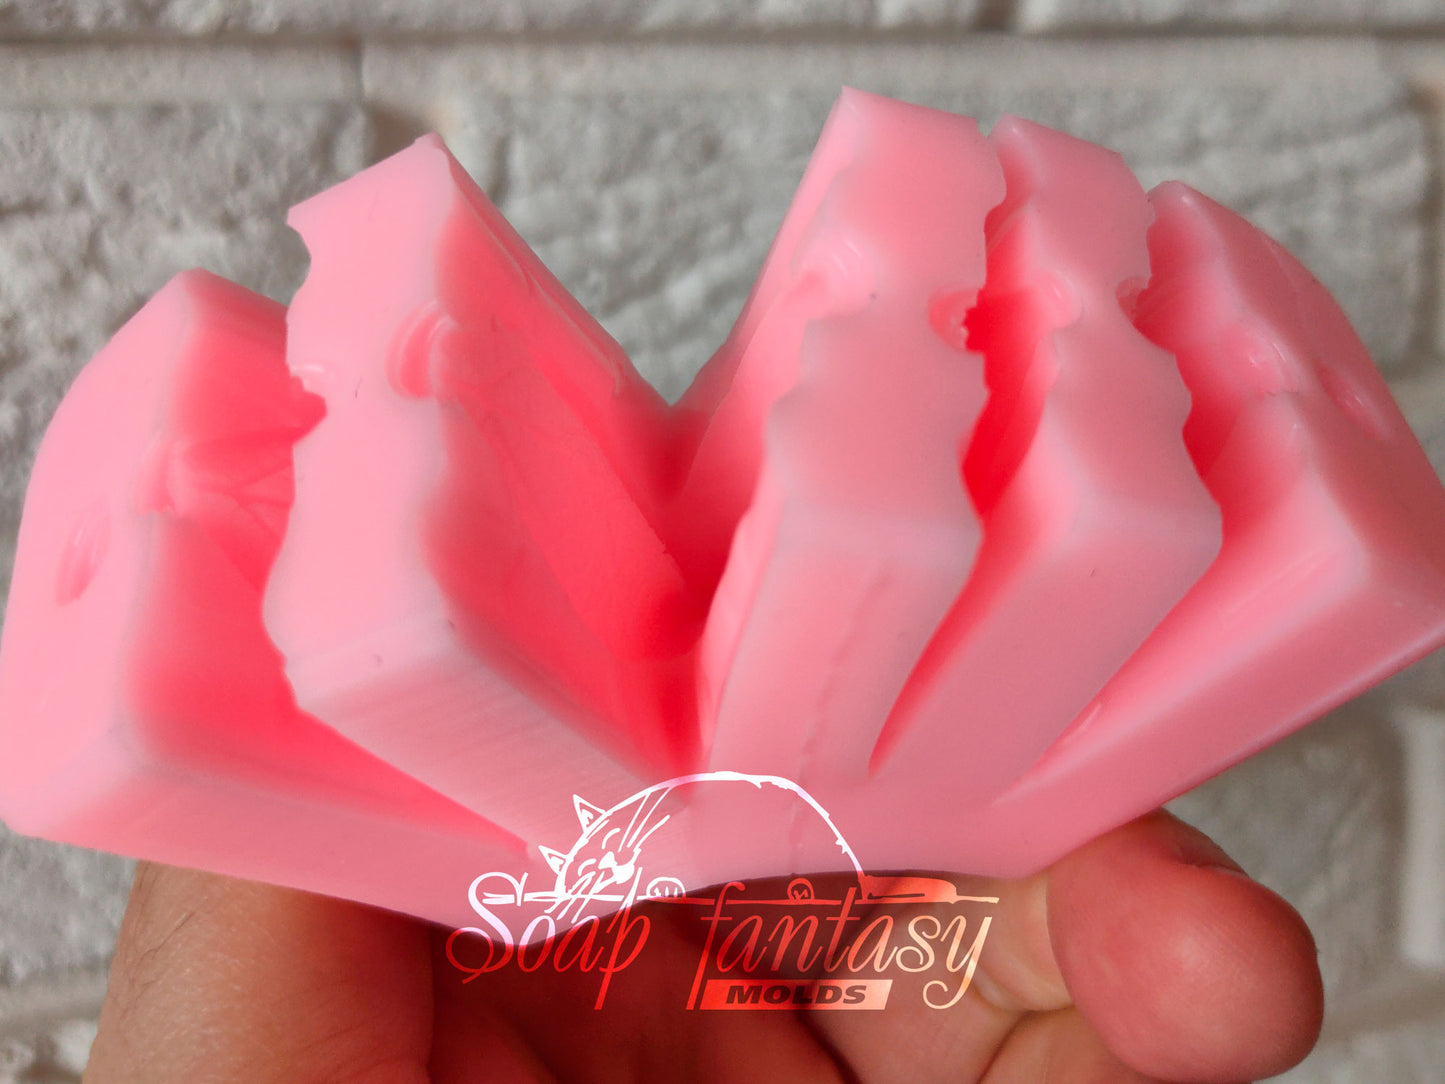 Flat 3D leafs set (6 pieces) silicone mold for soap making